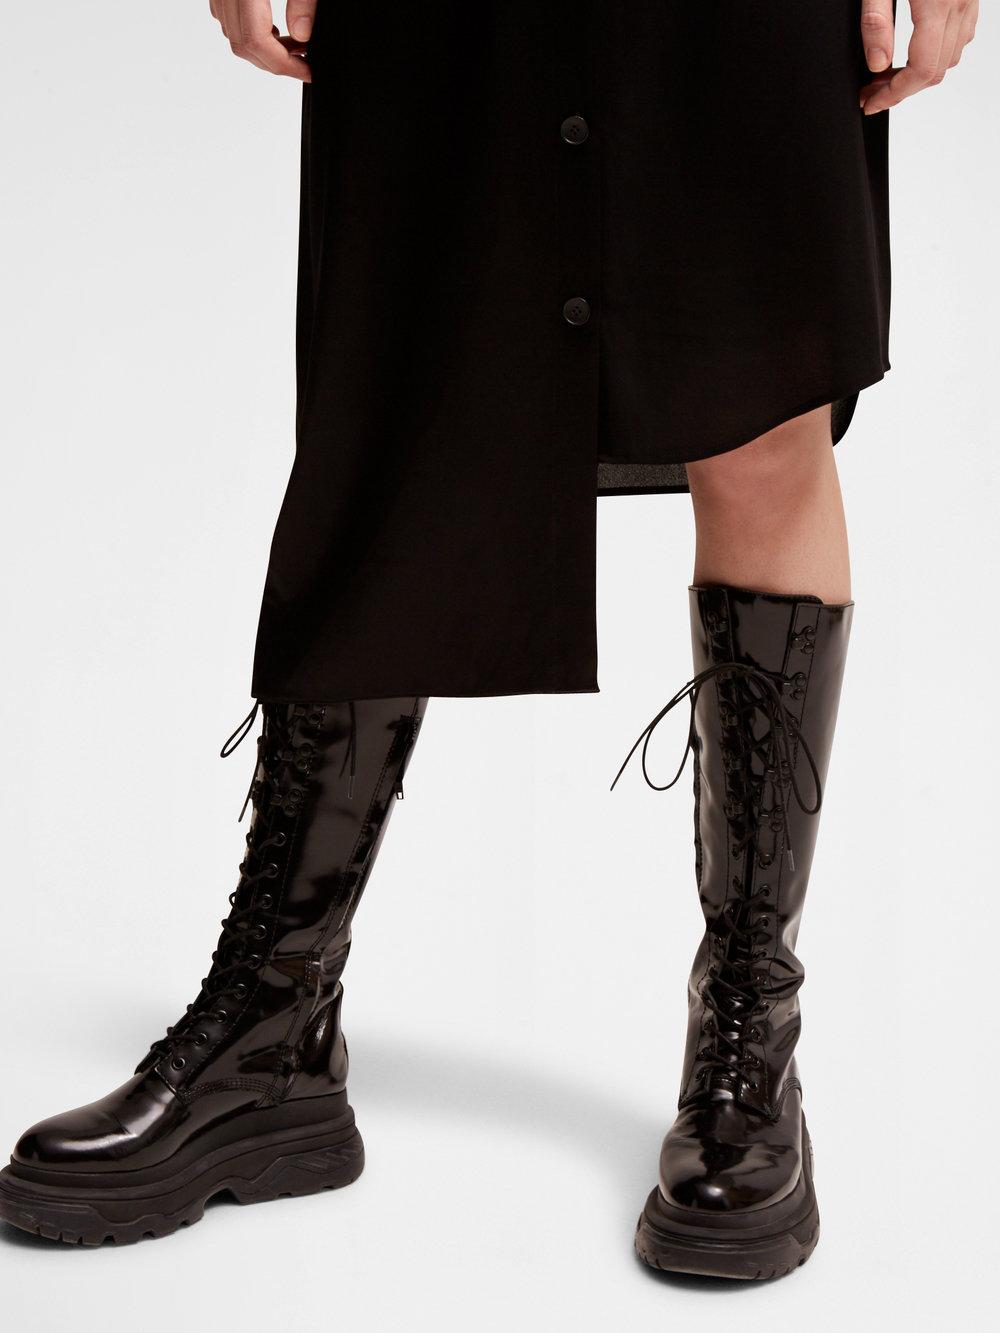 DKNY Leather Ann Knee High Work Boot in Black | Lyst